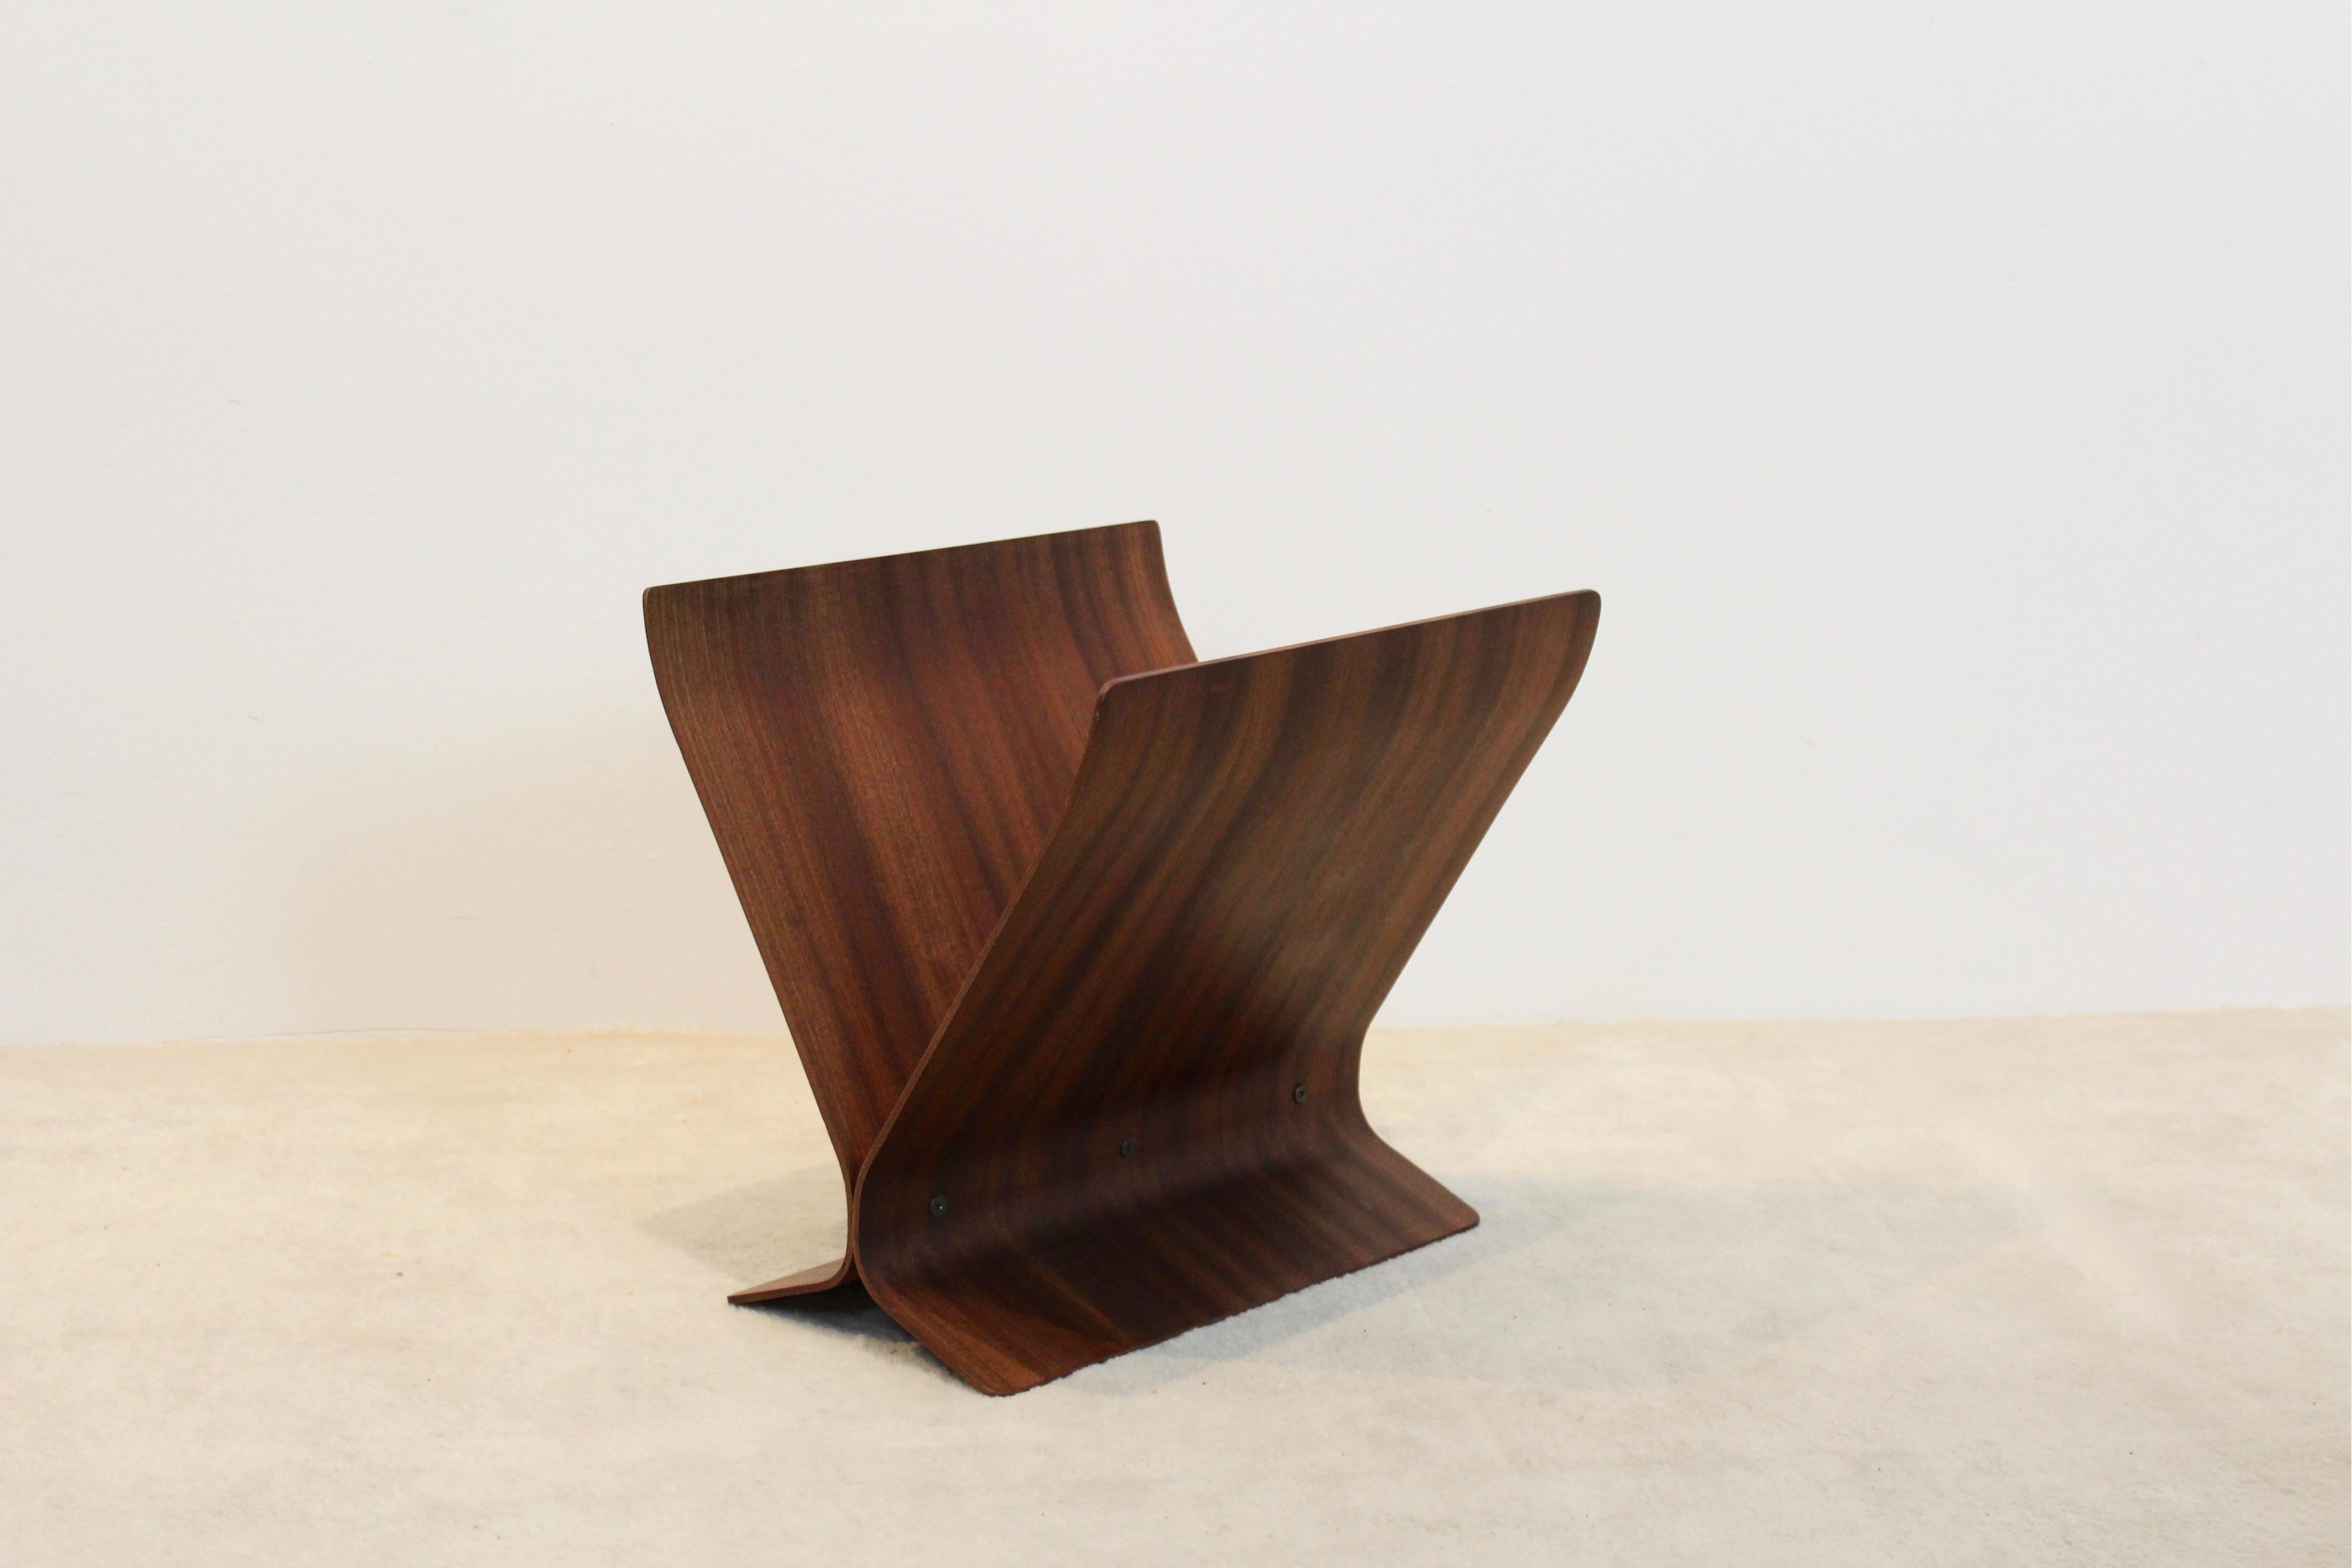 A magnificent magazine rack of bent rosewood pieces, layered and finished with a mahogany veneer, lend this piece a warm richness that hasn't faded a bit since it was constructed in the 1960s. Canadian origin and designed by Paul Rowan for Umbra in